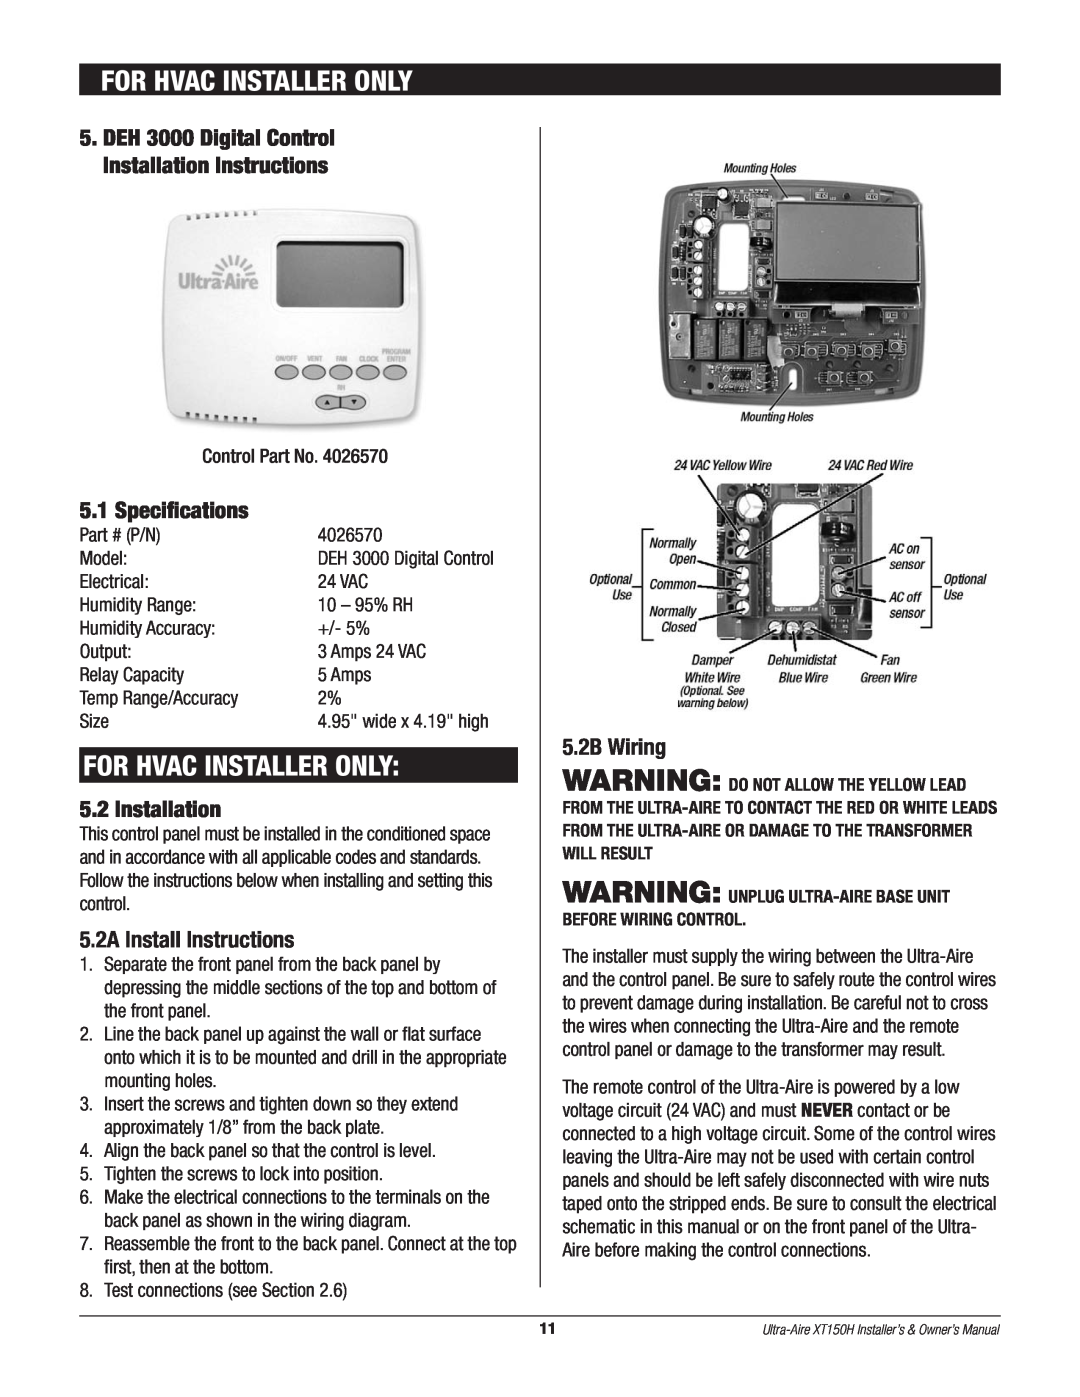 Therma-Stor Products Group XT150H owner manual Specifications, Installation, 5.2A Install Instructions, 5.2B Wiring 